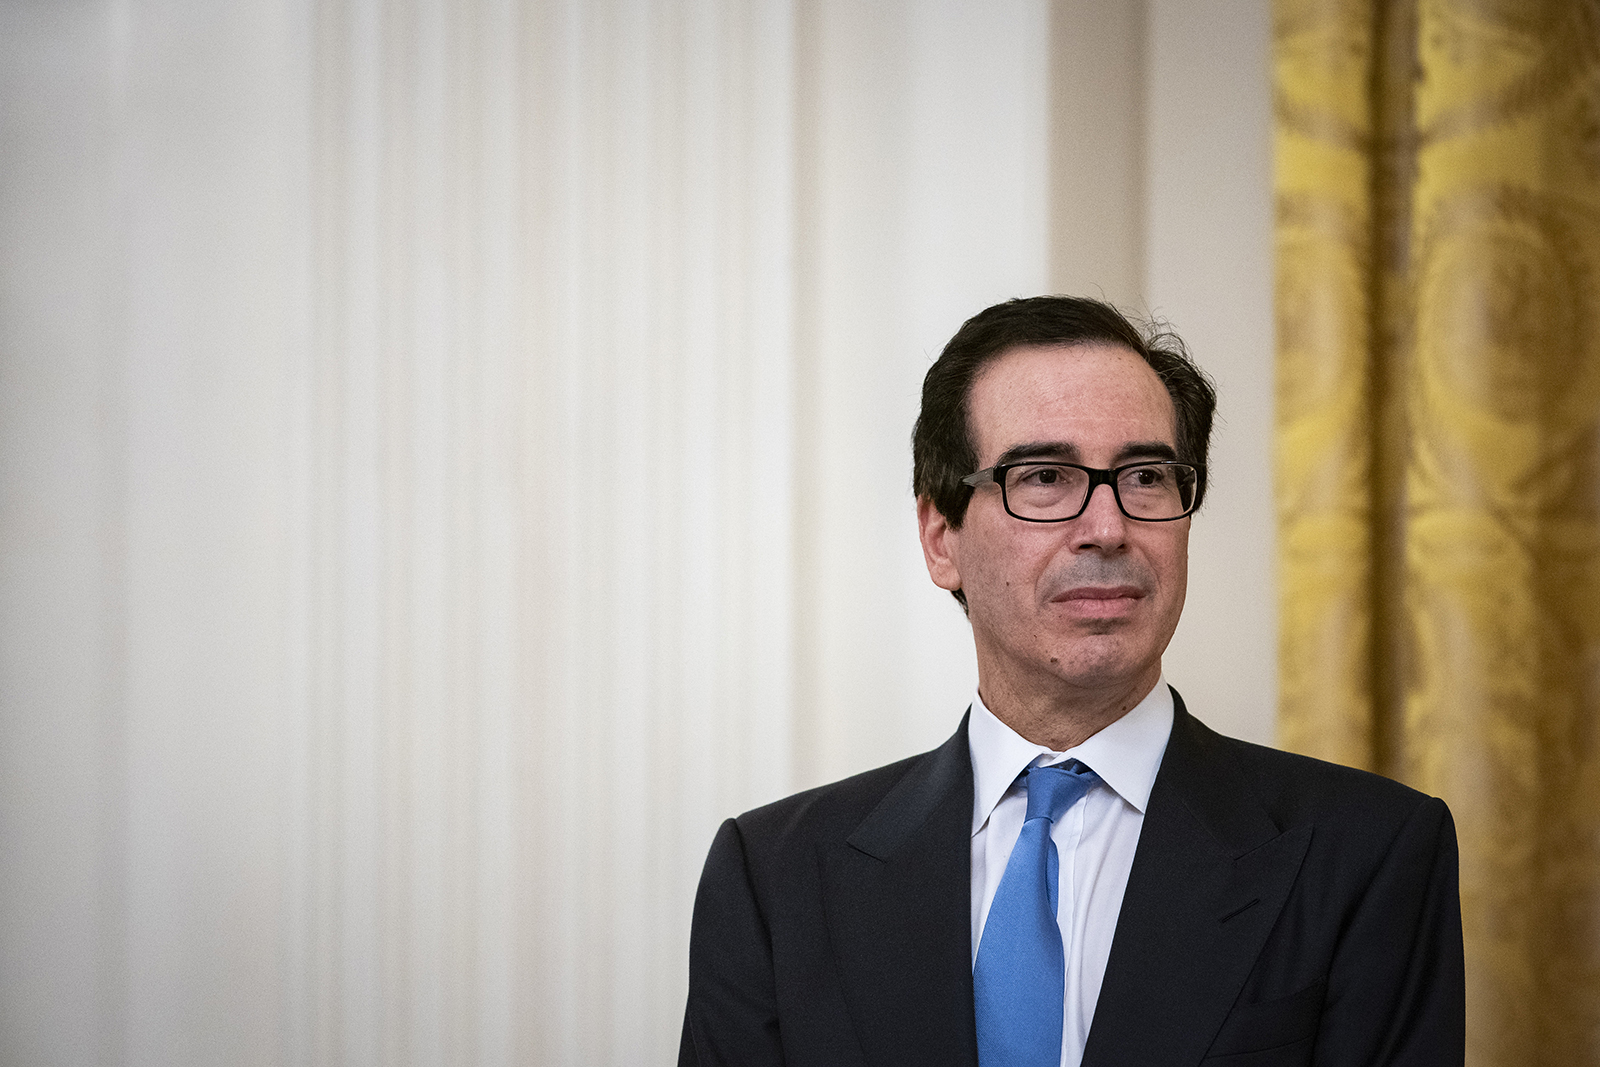 Steven Mnuchin, U.S. Treasury secretary, listens during a Paycheck Protection Program (PPP) at the White House in Washington, DC, on Tuesday, April 28.